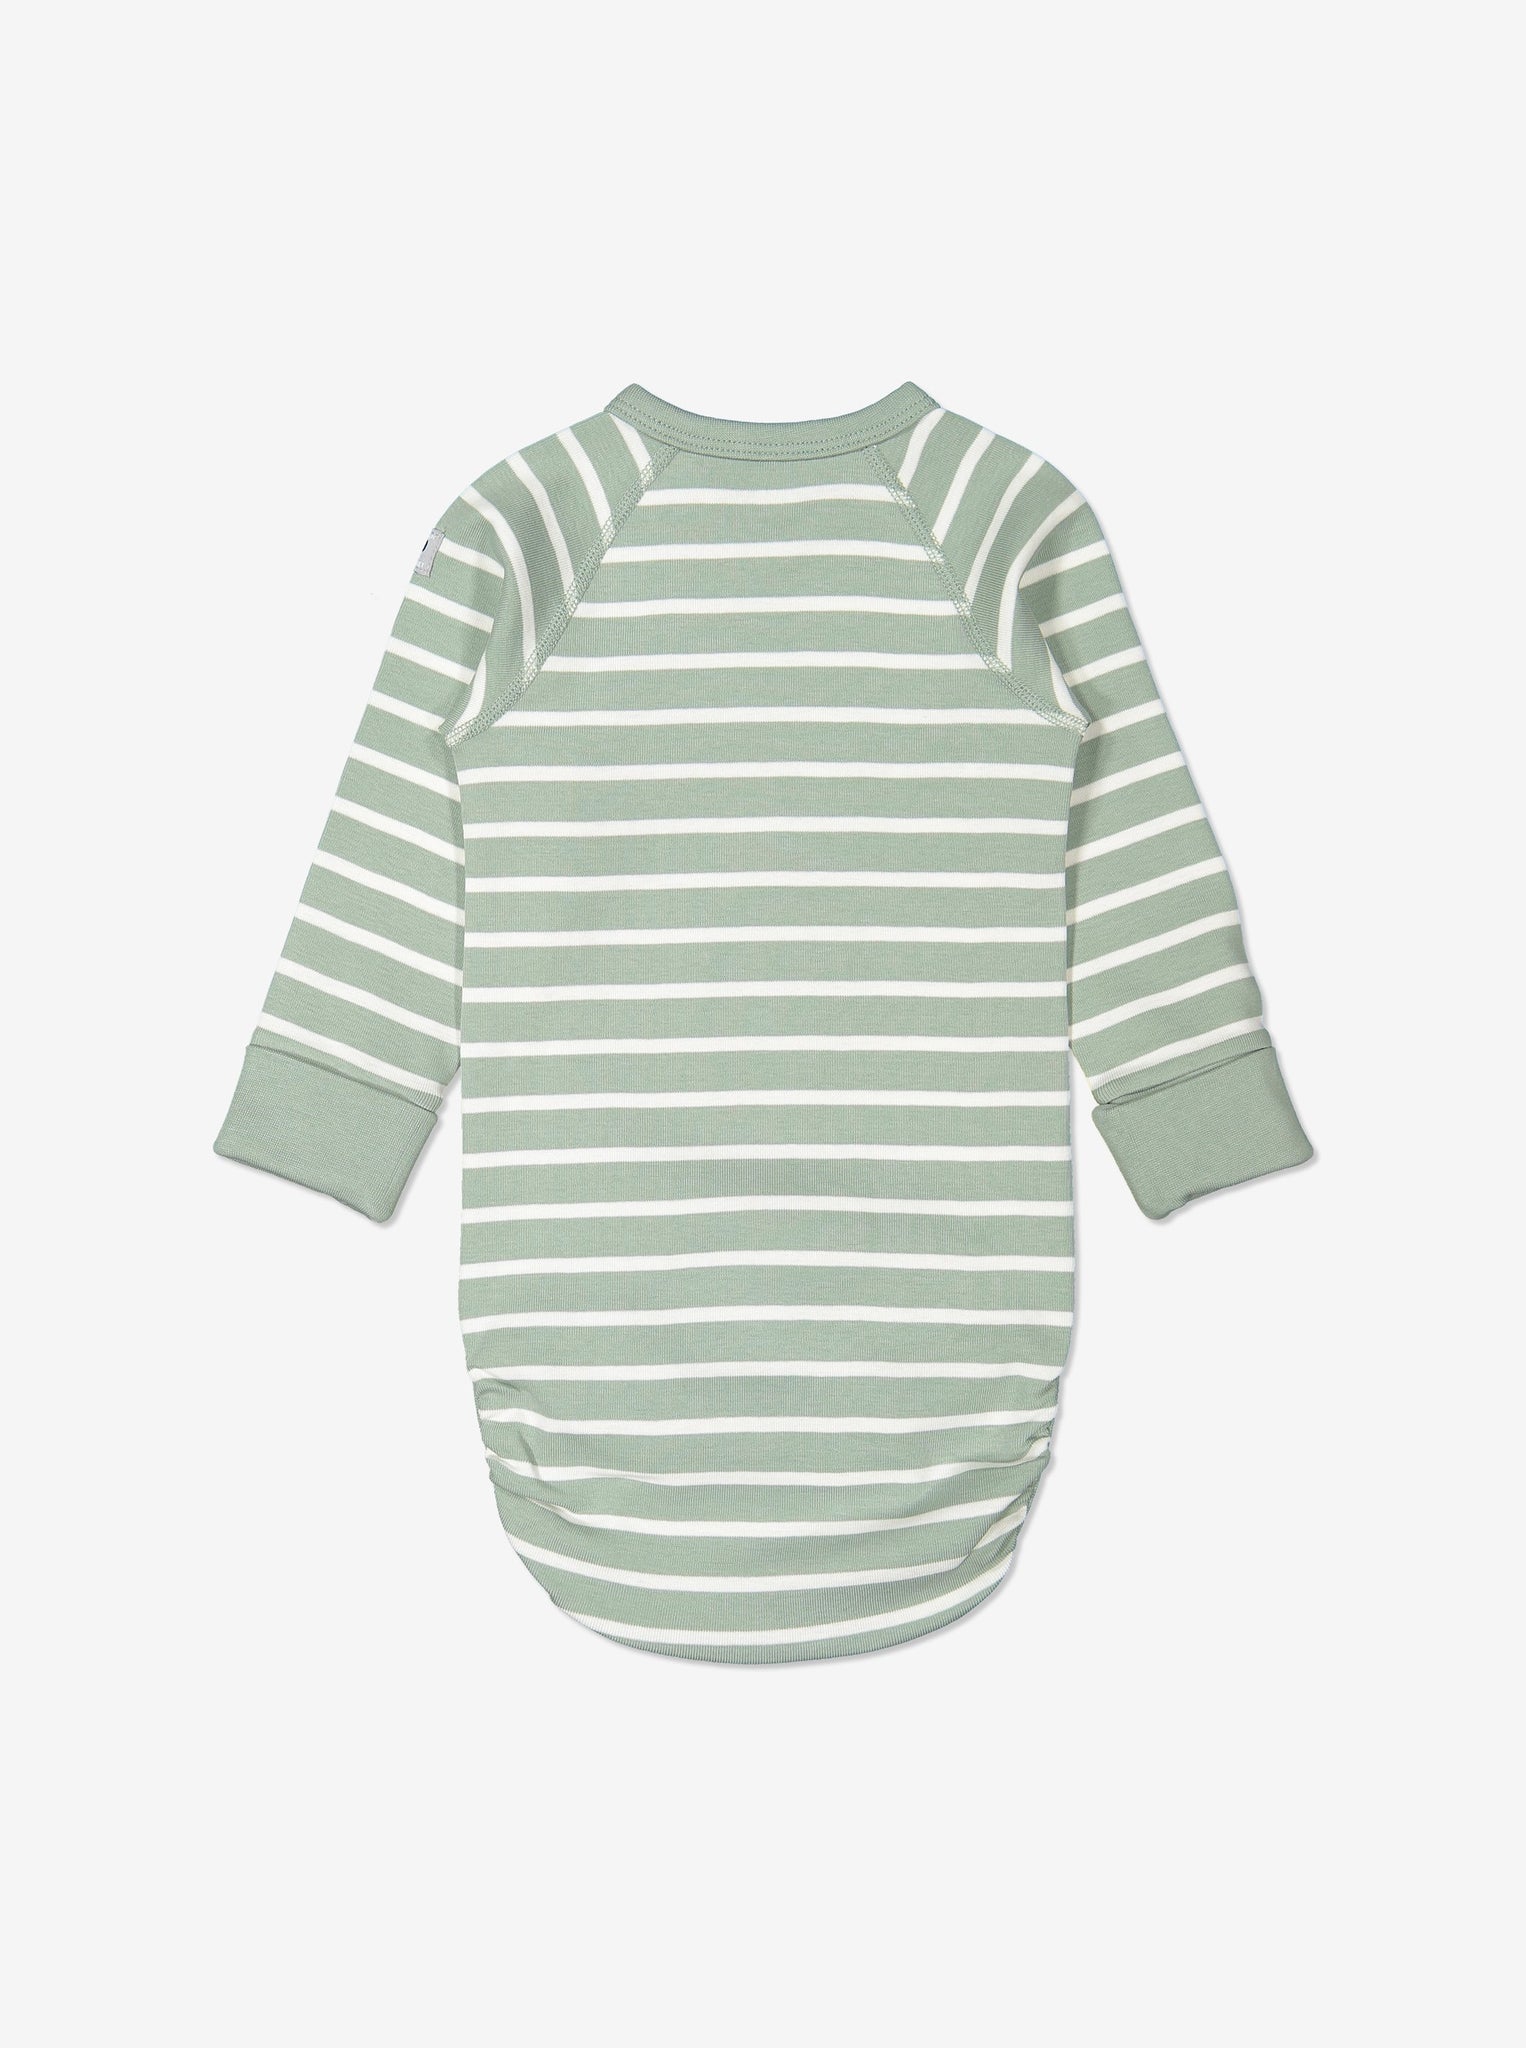 Back view of green and white striped babygrow for newborn babies in a wraparound style, made from GOTS organic cotton fabric